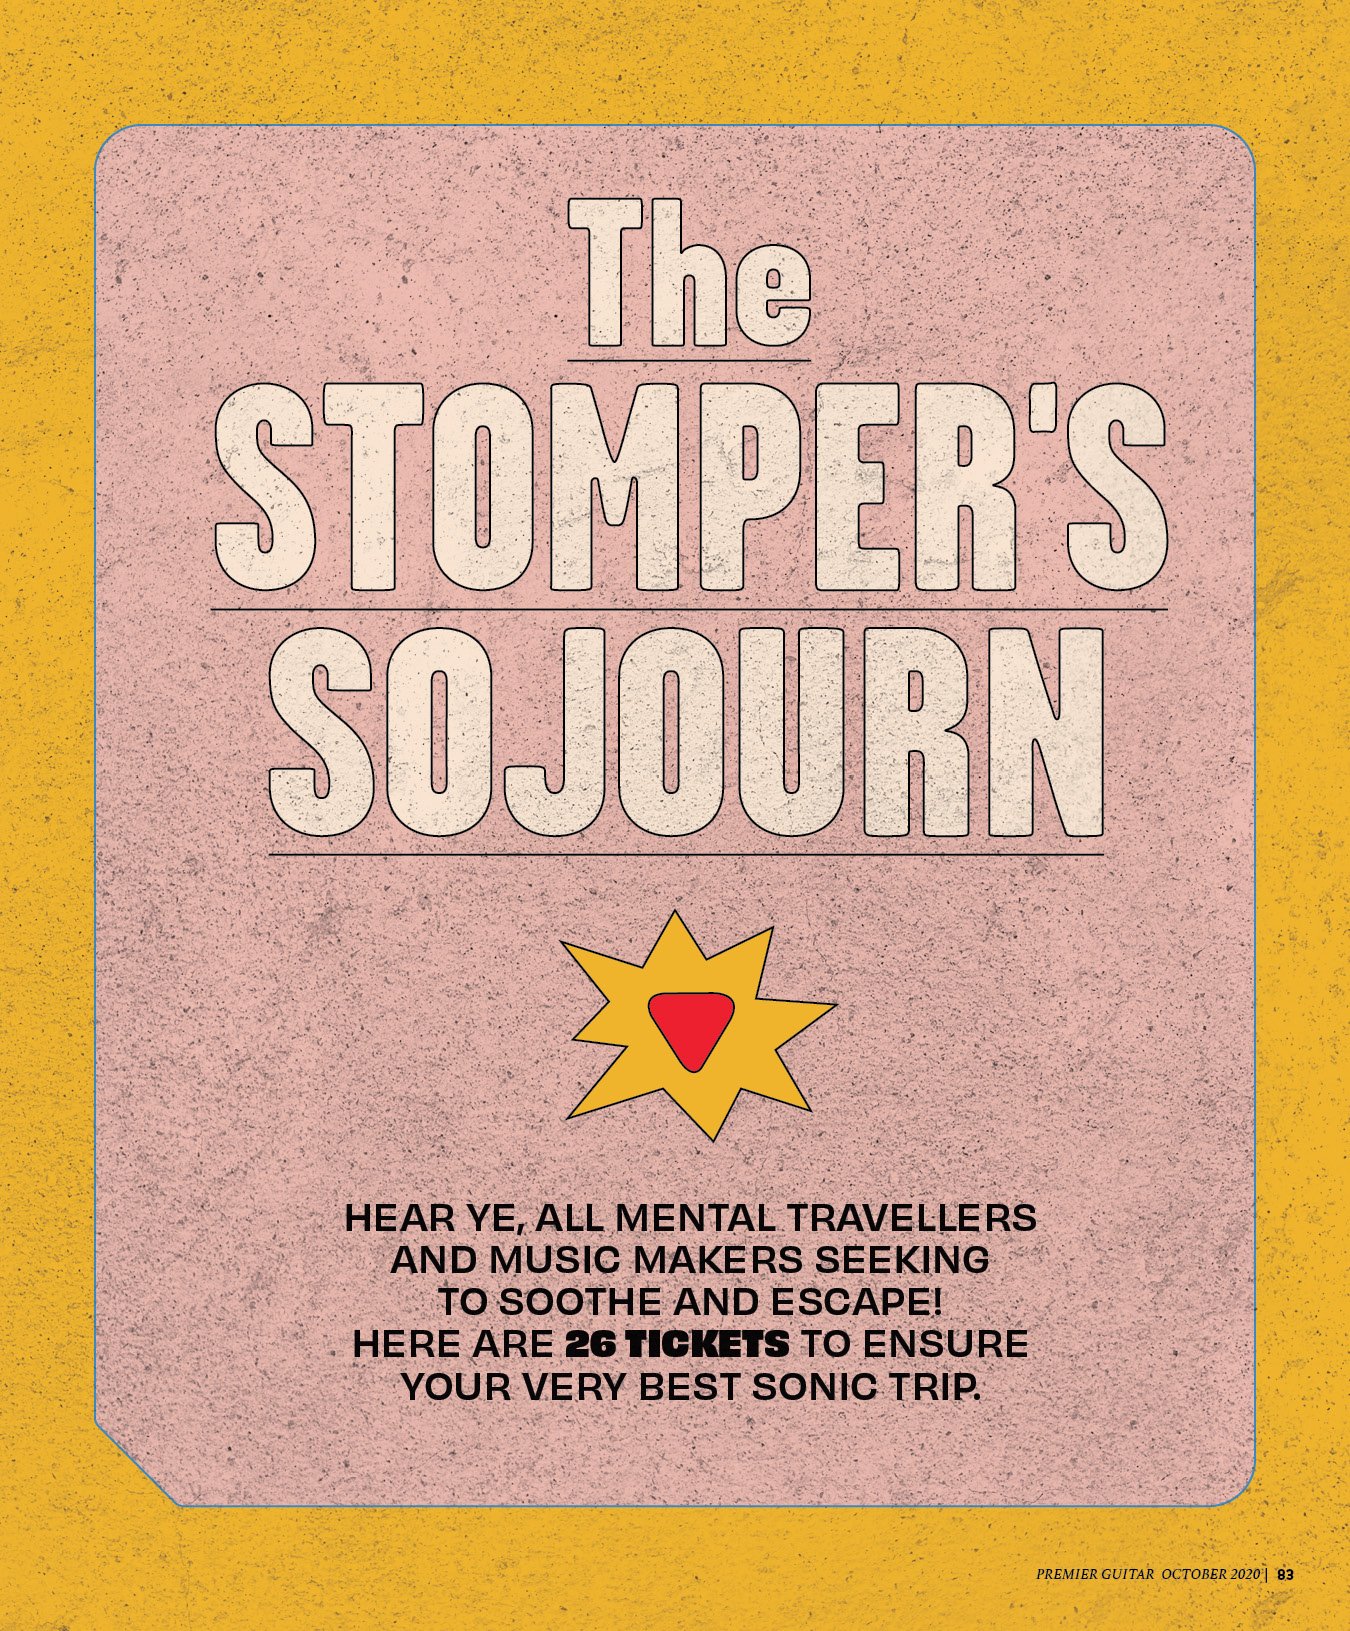 The Stomper's Sojourn